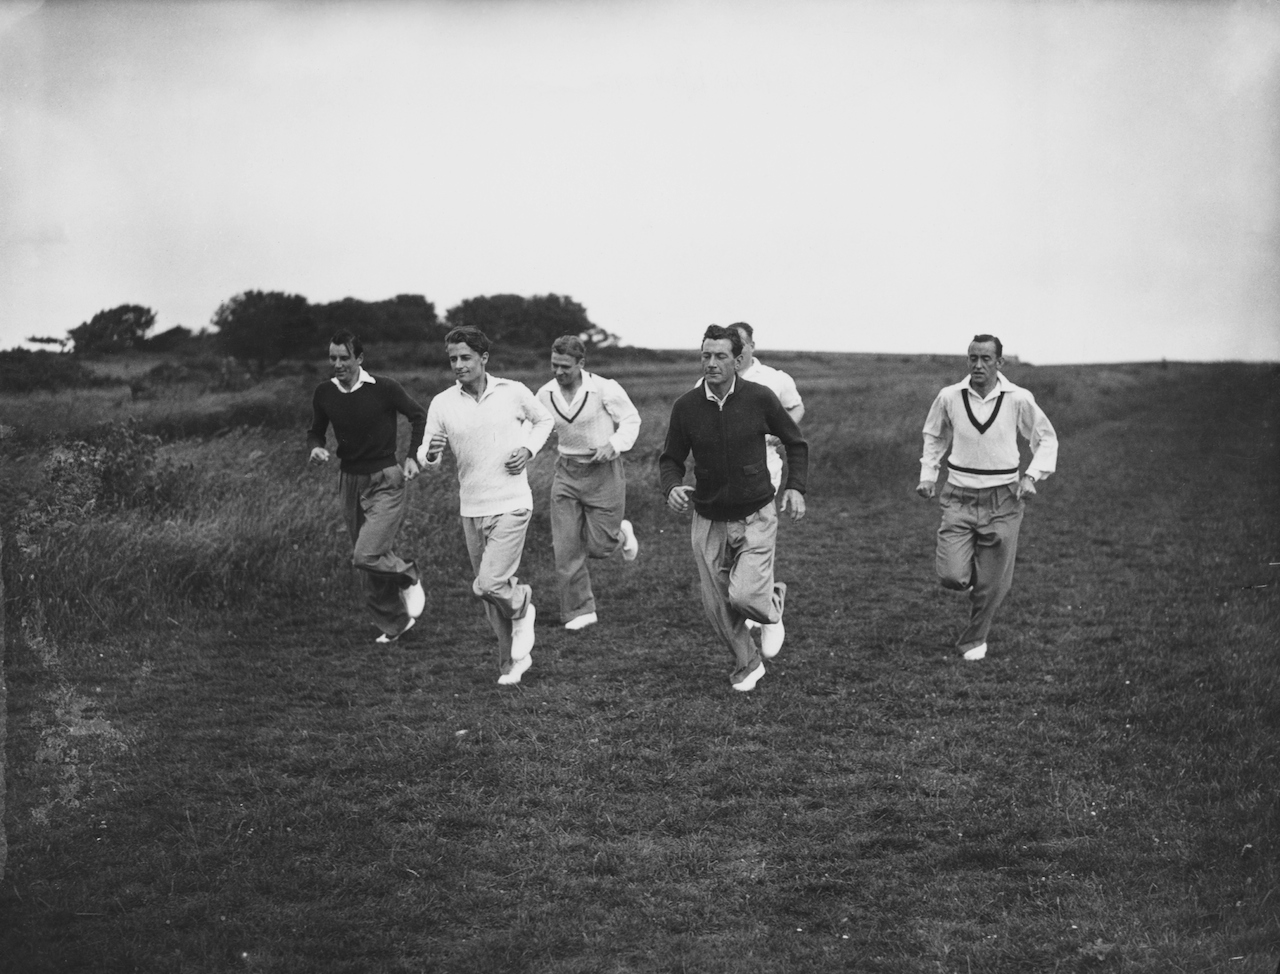 English Davis Cup tennis team members (left to right) Fred Perry (1909 - 1995), Bunny Austin (1906 - 2000), Raymond Tuckey (1910 - 2005), Dan Maskell (1908 - 1992) and Pat Hughes (1902 - 1997) training on Beachy Head, Sussex, 14th July 1936. They are working with Arsenal football club's trainer, Tom Whittaker. (Photo by Topical Press Agency/Hulton Archive/Getty Images)